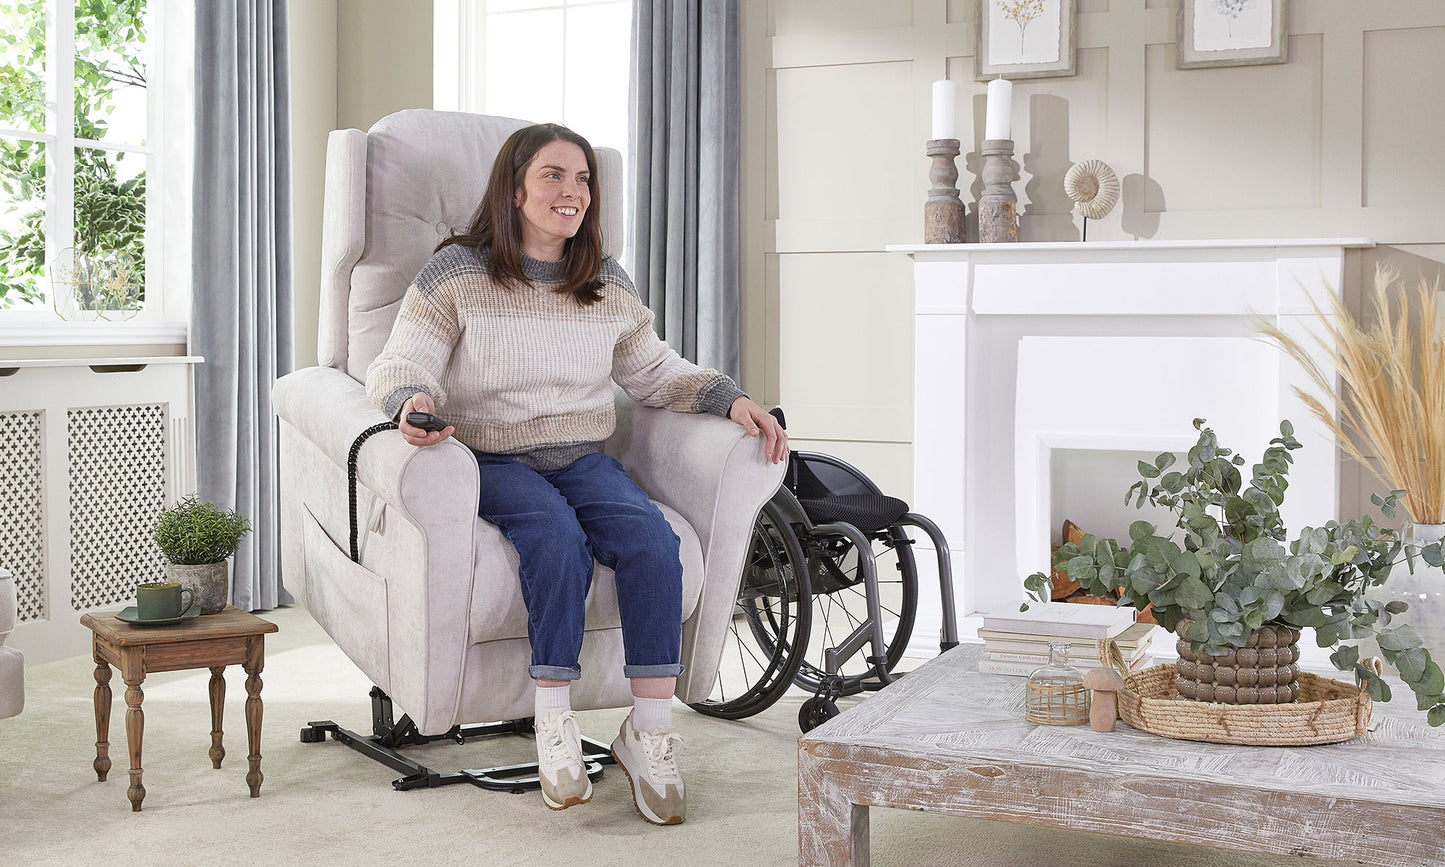 Albany Riser Recliner Chair